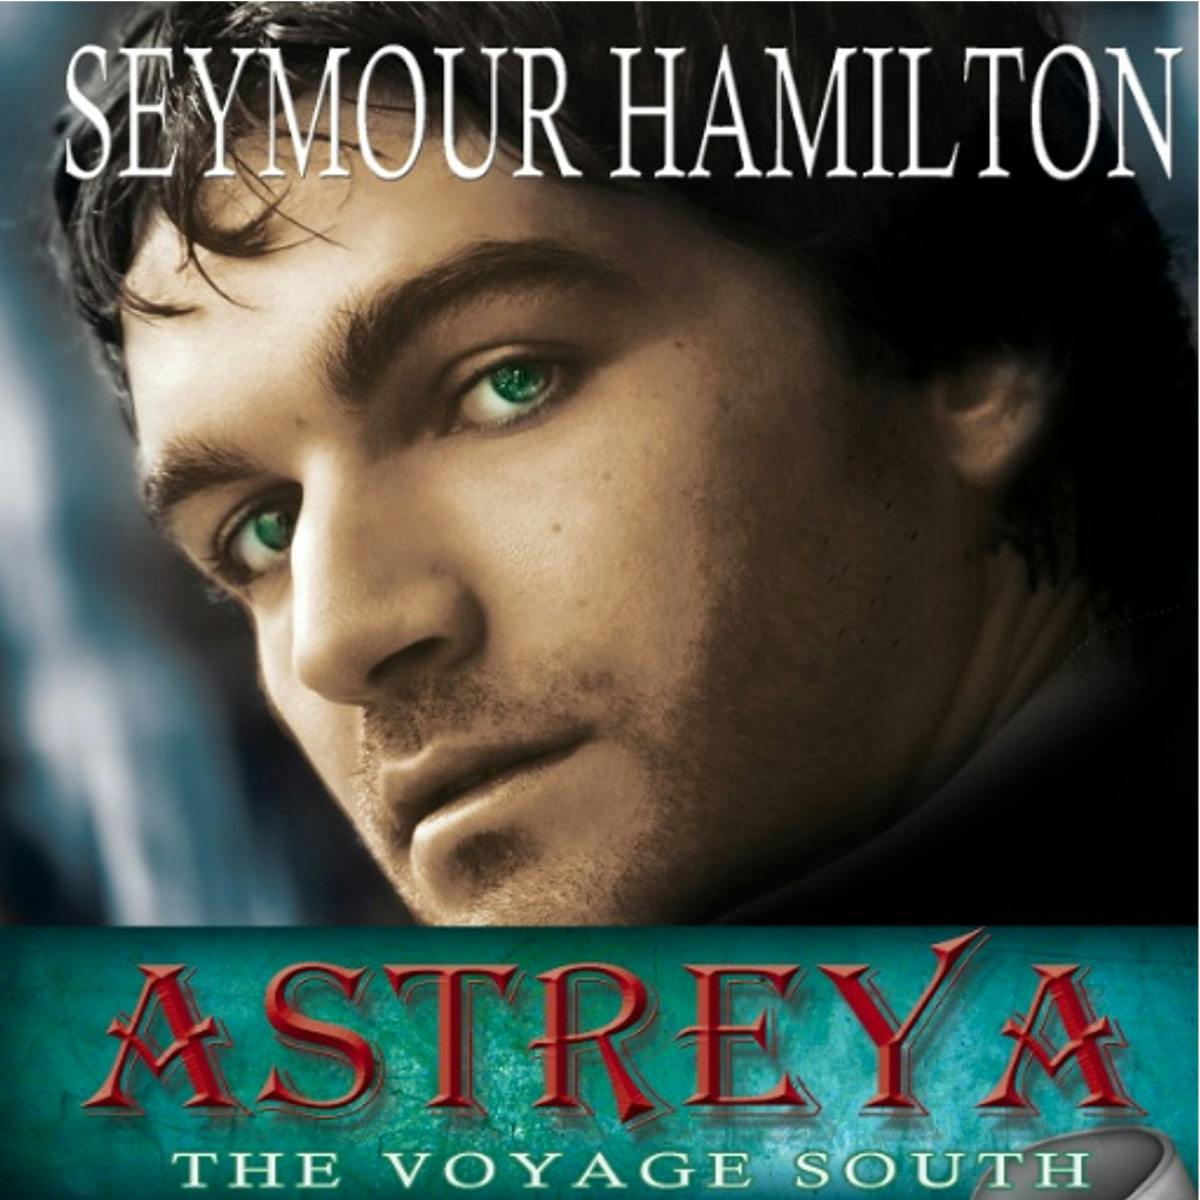 Astreya: Book 1. The Voyage South